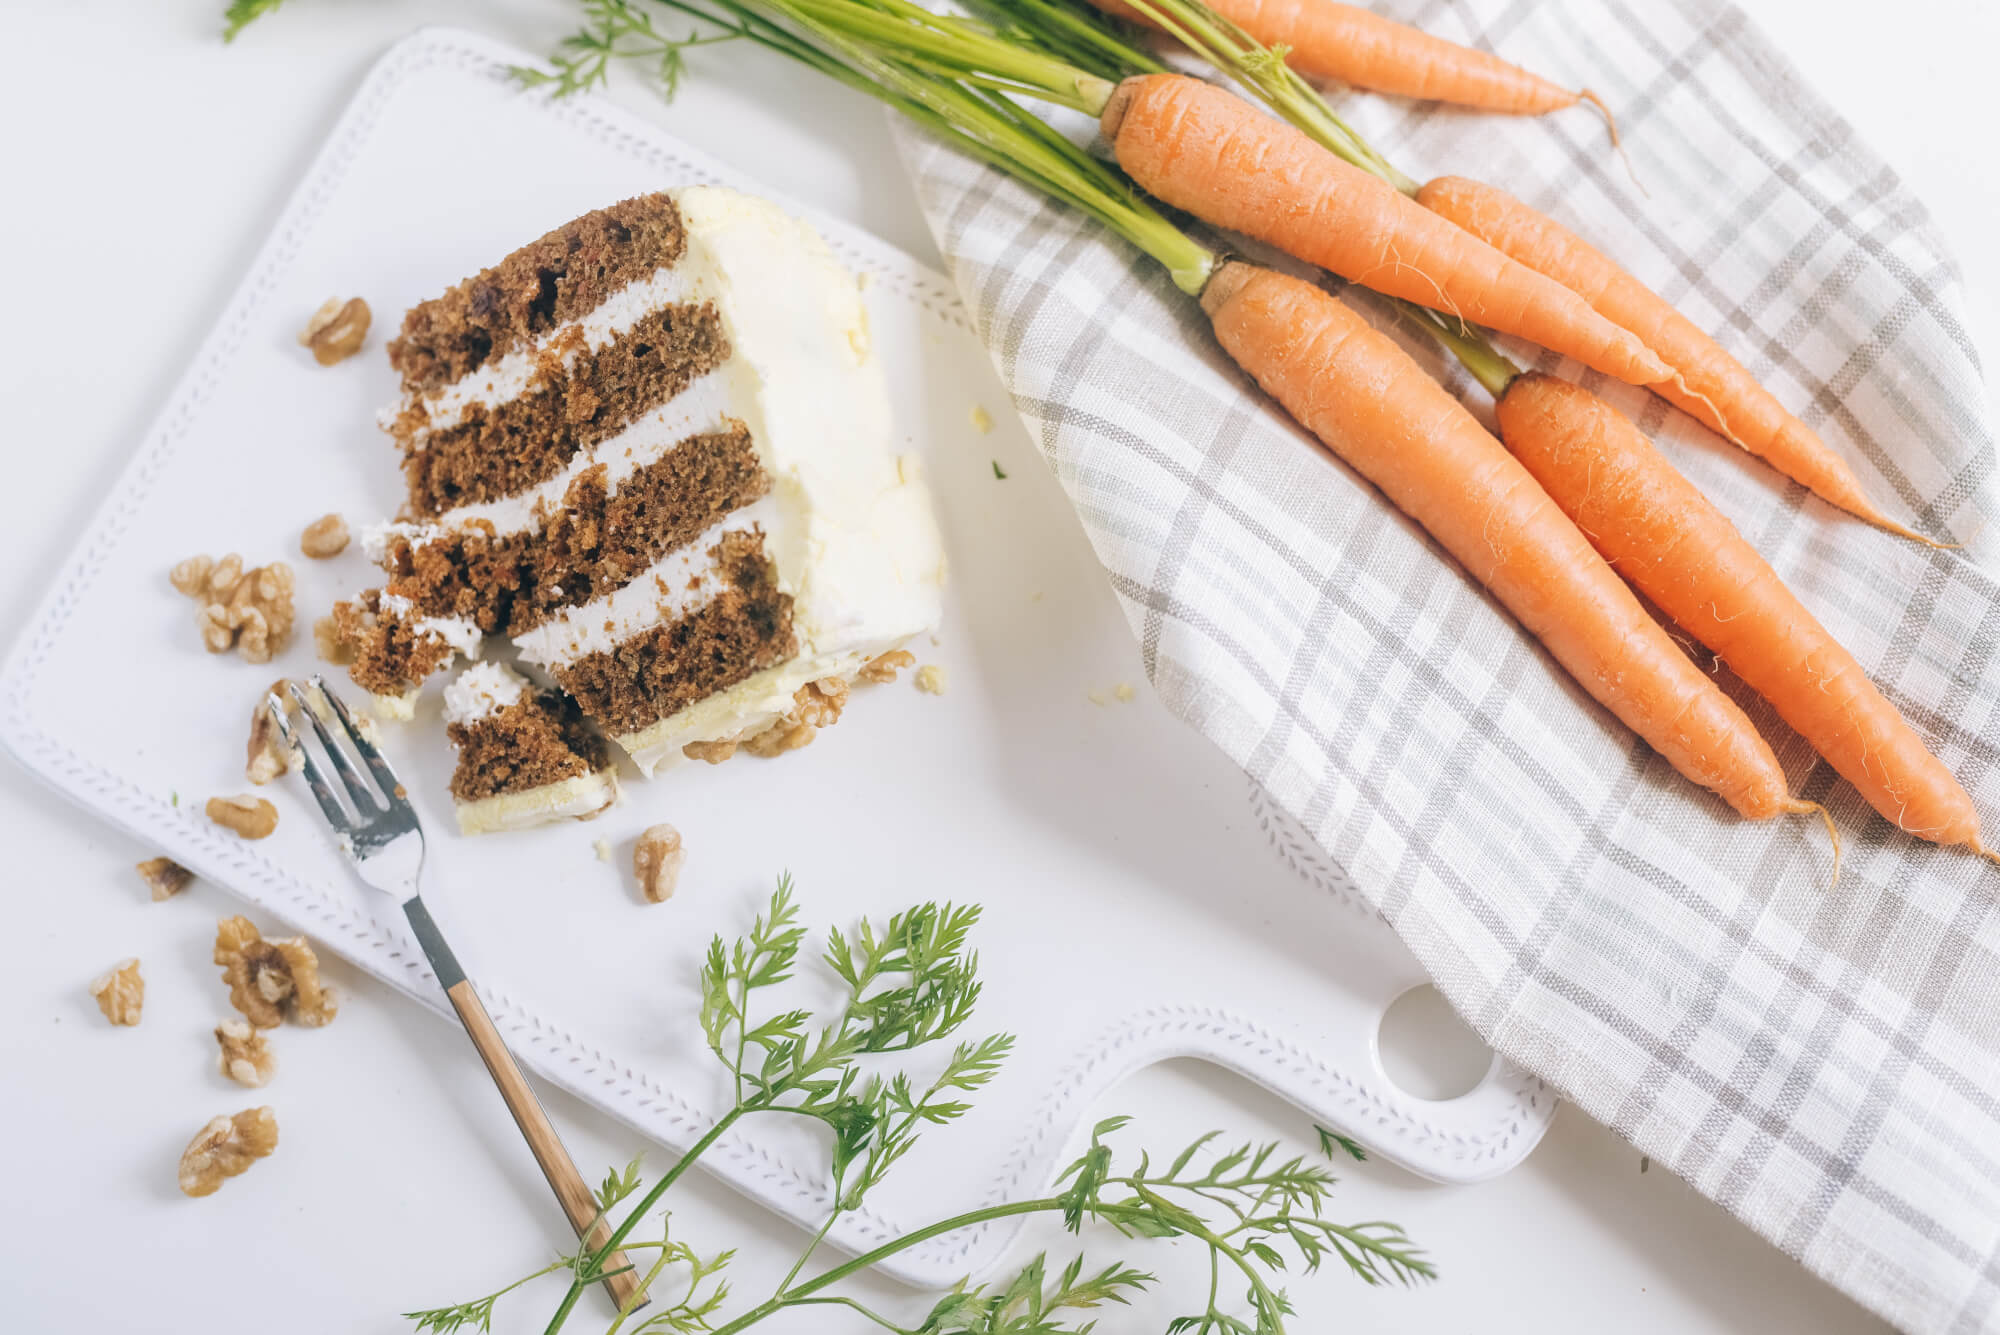 Our no waste carrot cake recipe